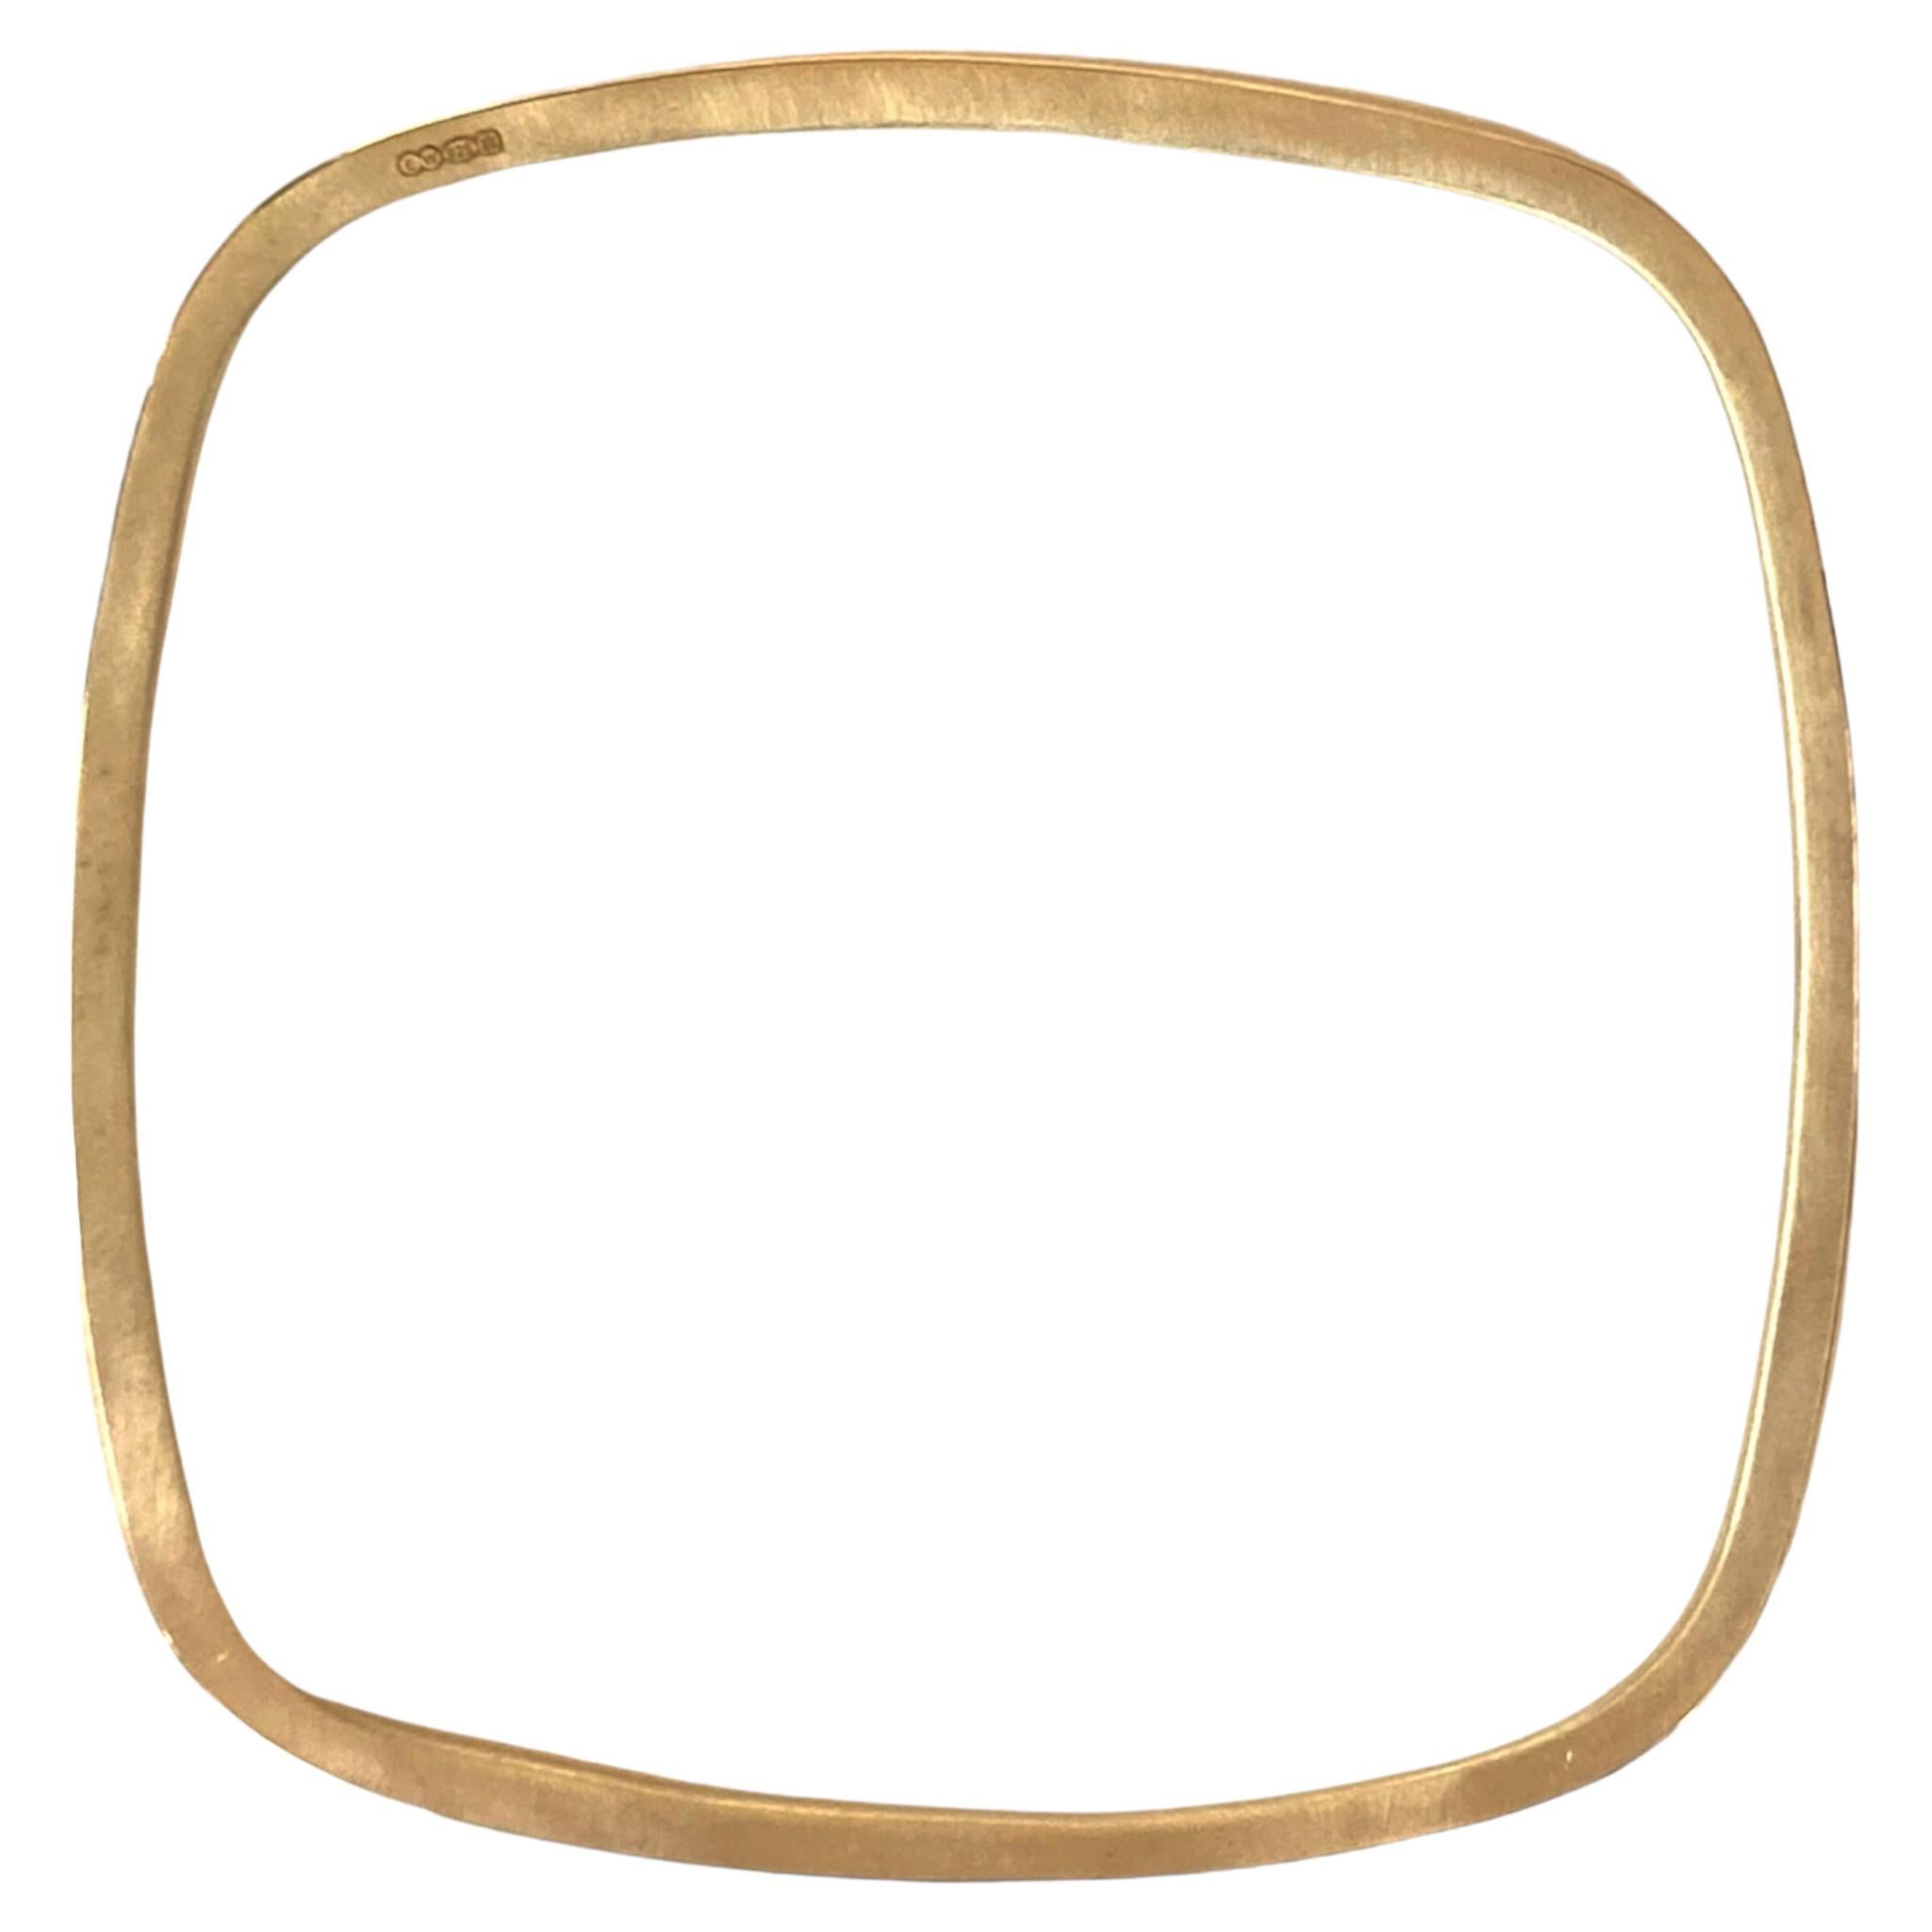 Gold Vermeil Hand Forged Square Box Bangle, Size Small